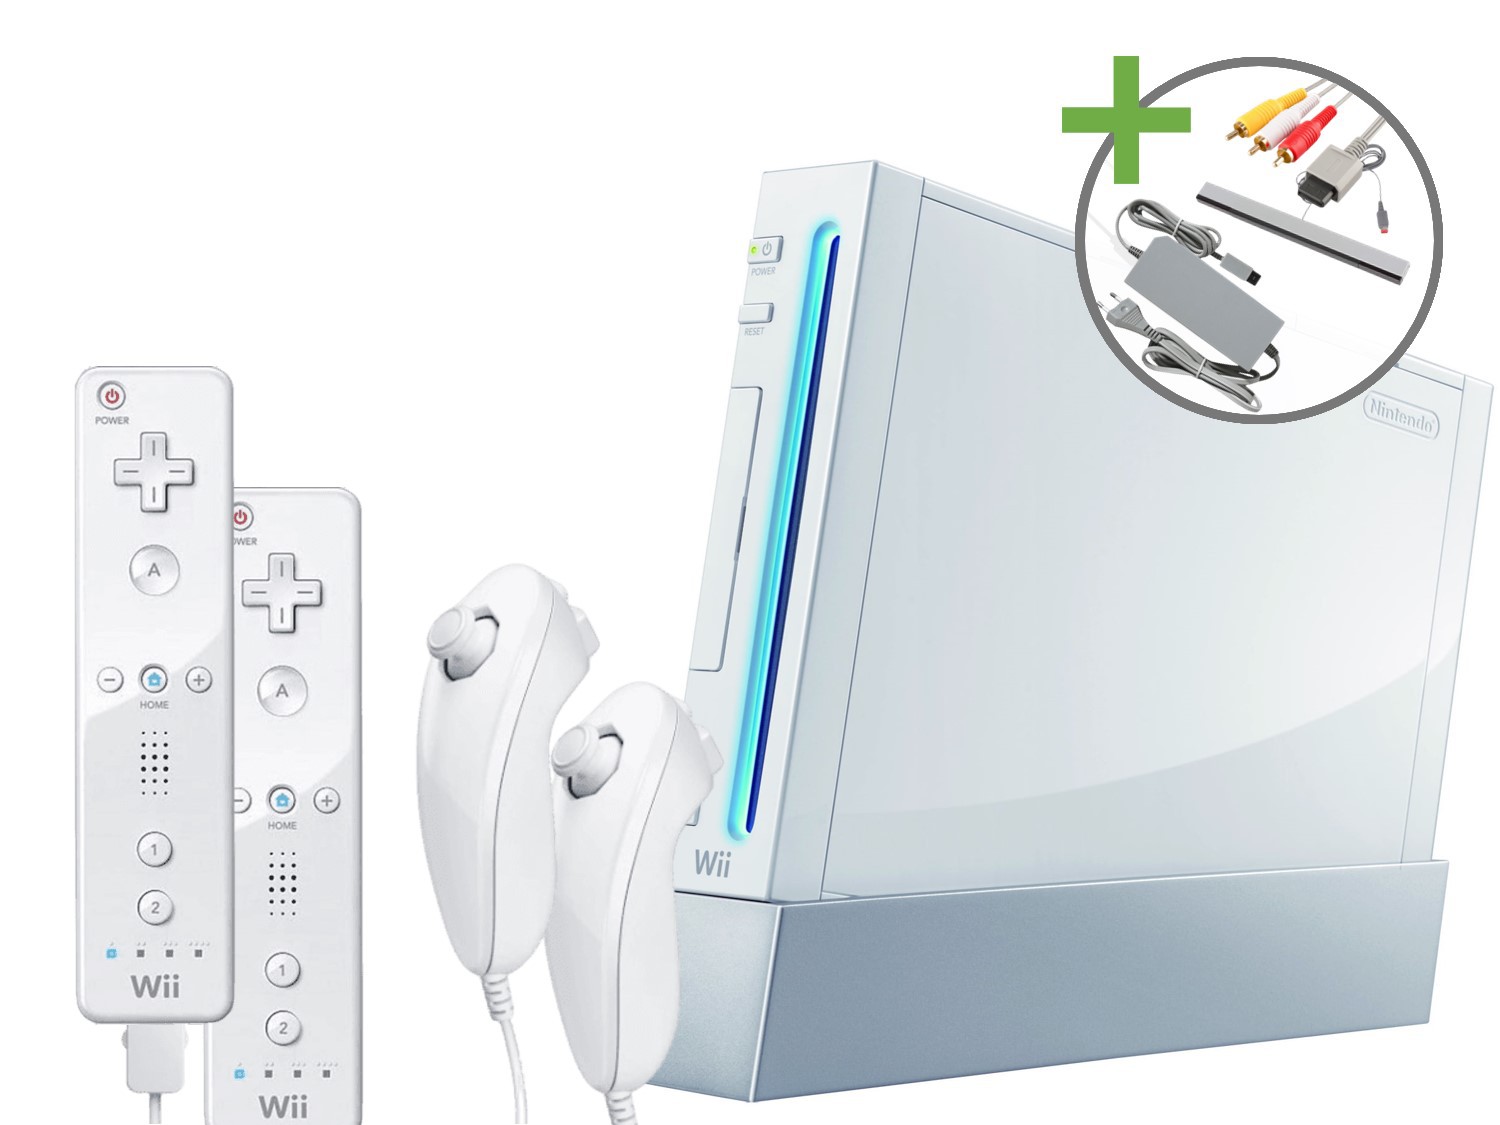 Nintendo Wii Starter Pack - Two Player Edition Kopen | Wii Hardware